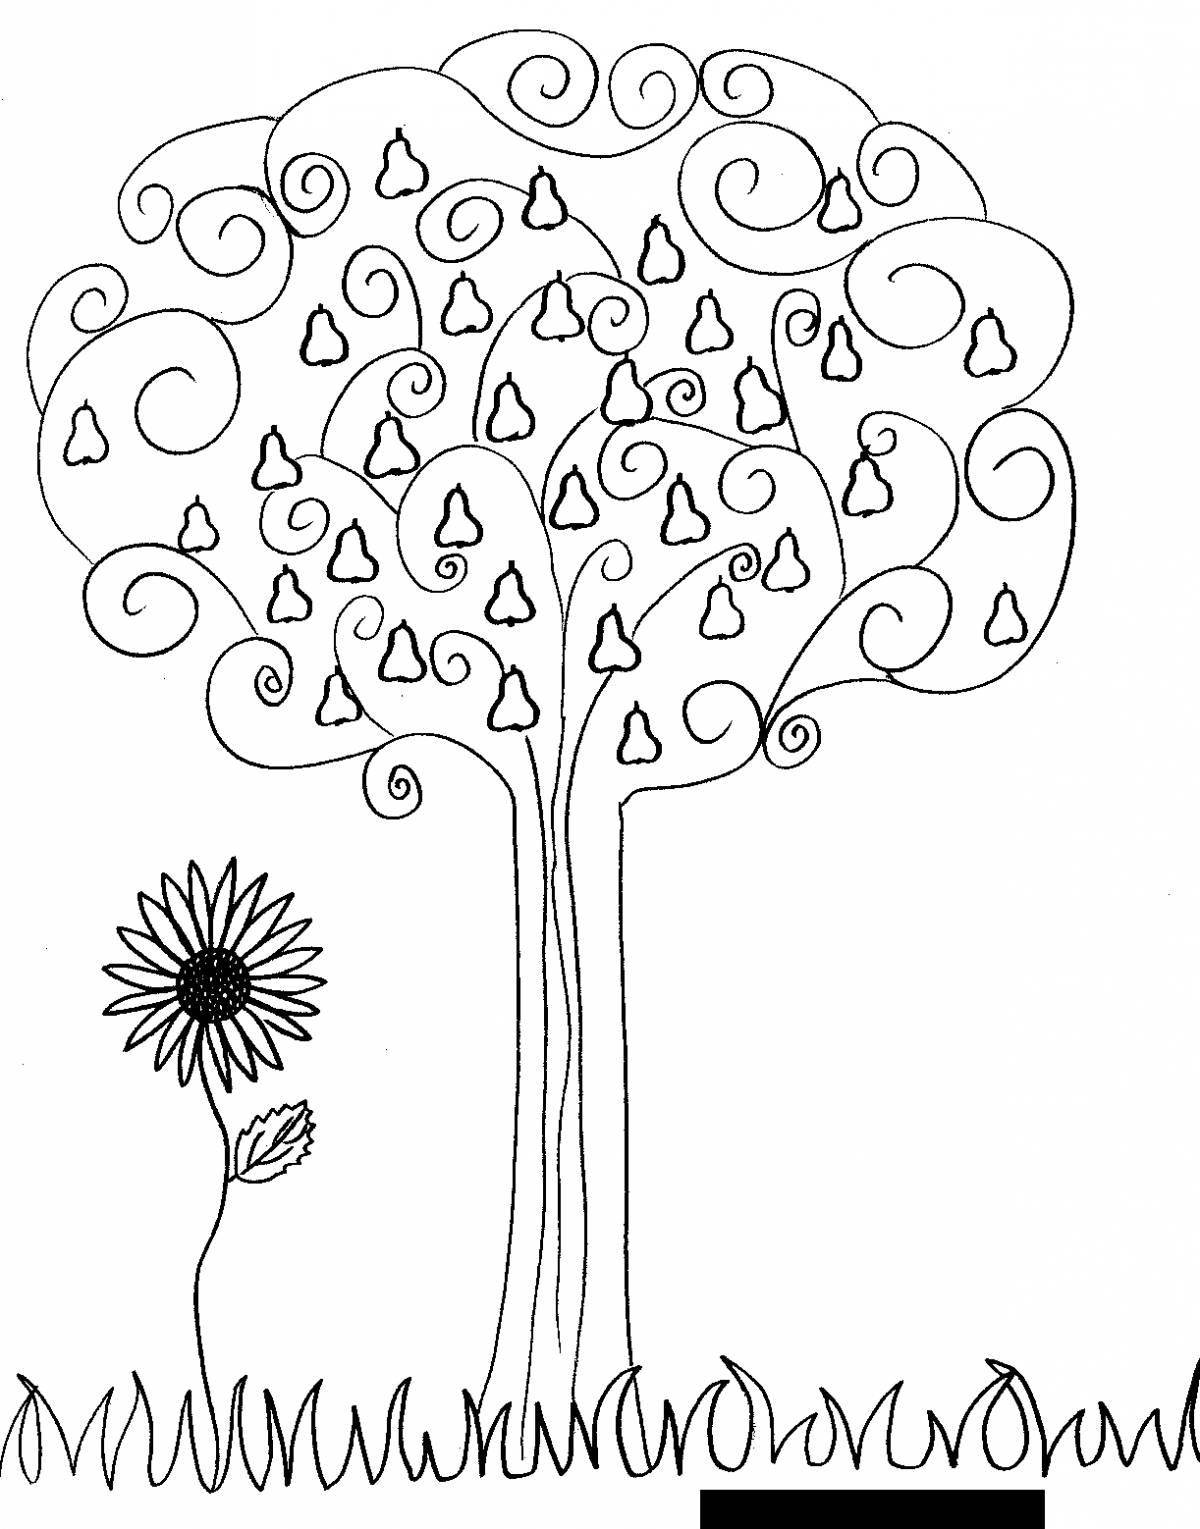 Colorful tree coloring book for 3-4 year olds